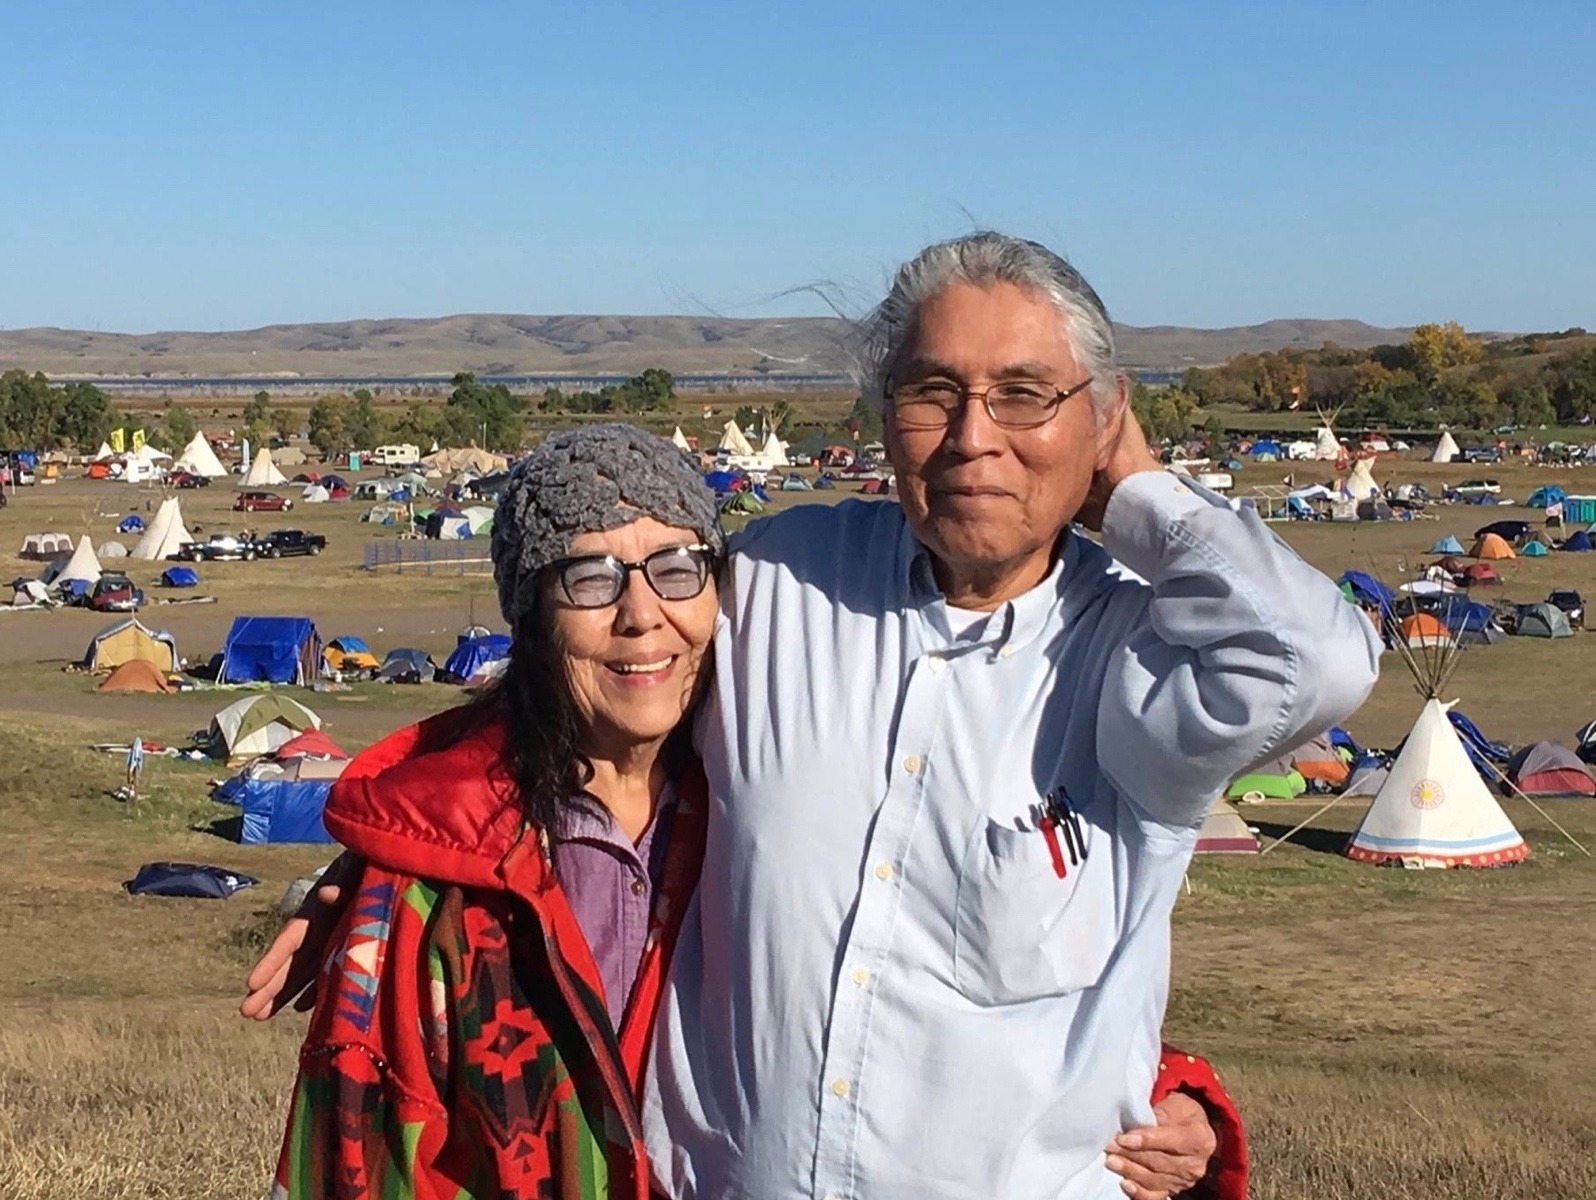 Lois Red Elk (Dakota) and her husband, Dennis Reed, joining people from across the plains at Standing Rock in 2016.